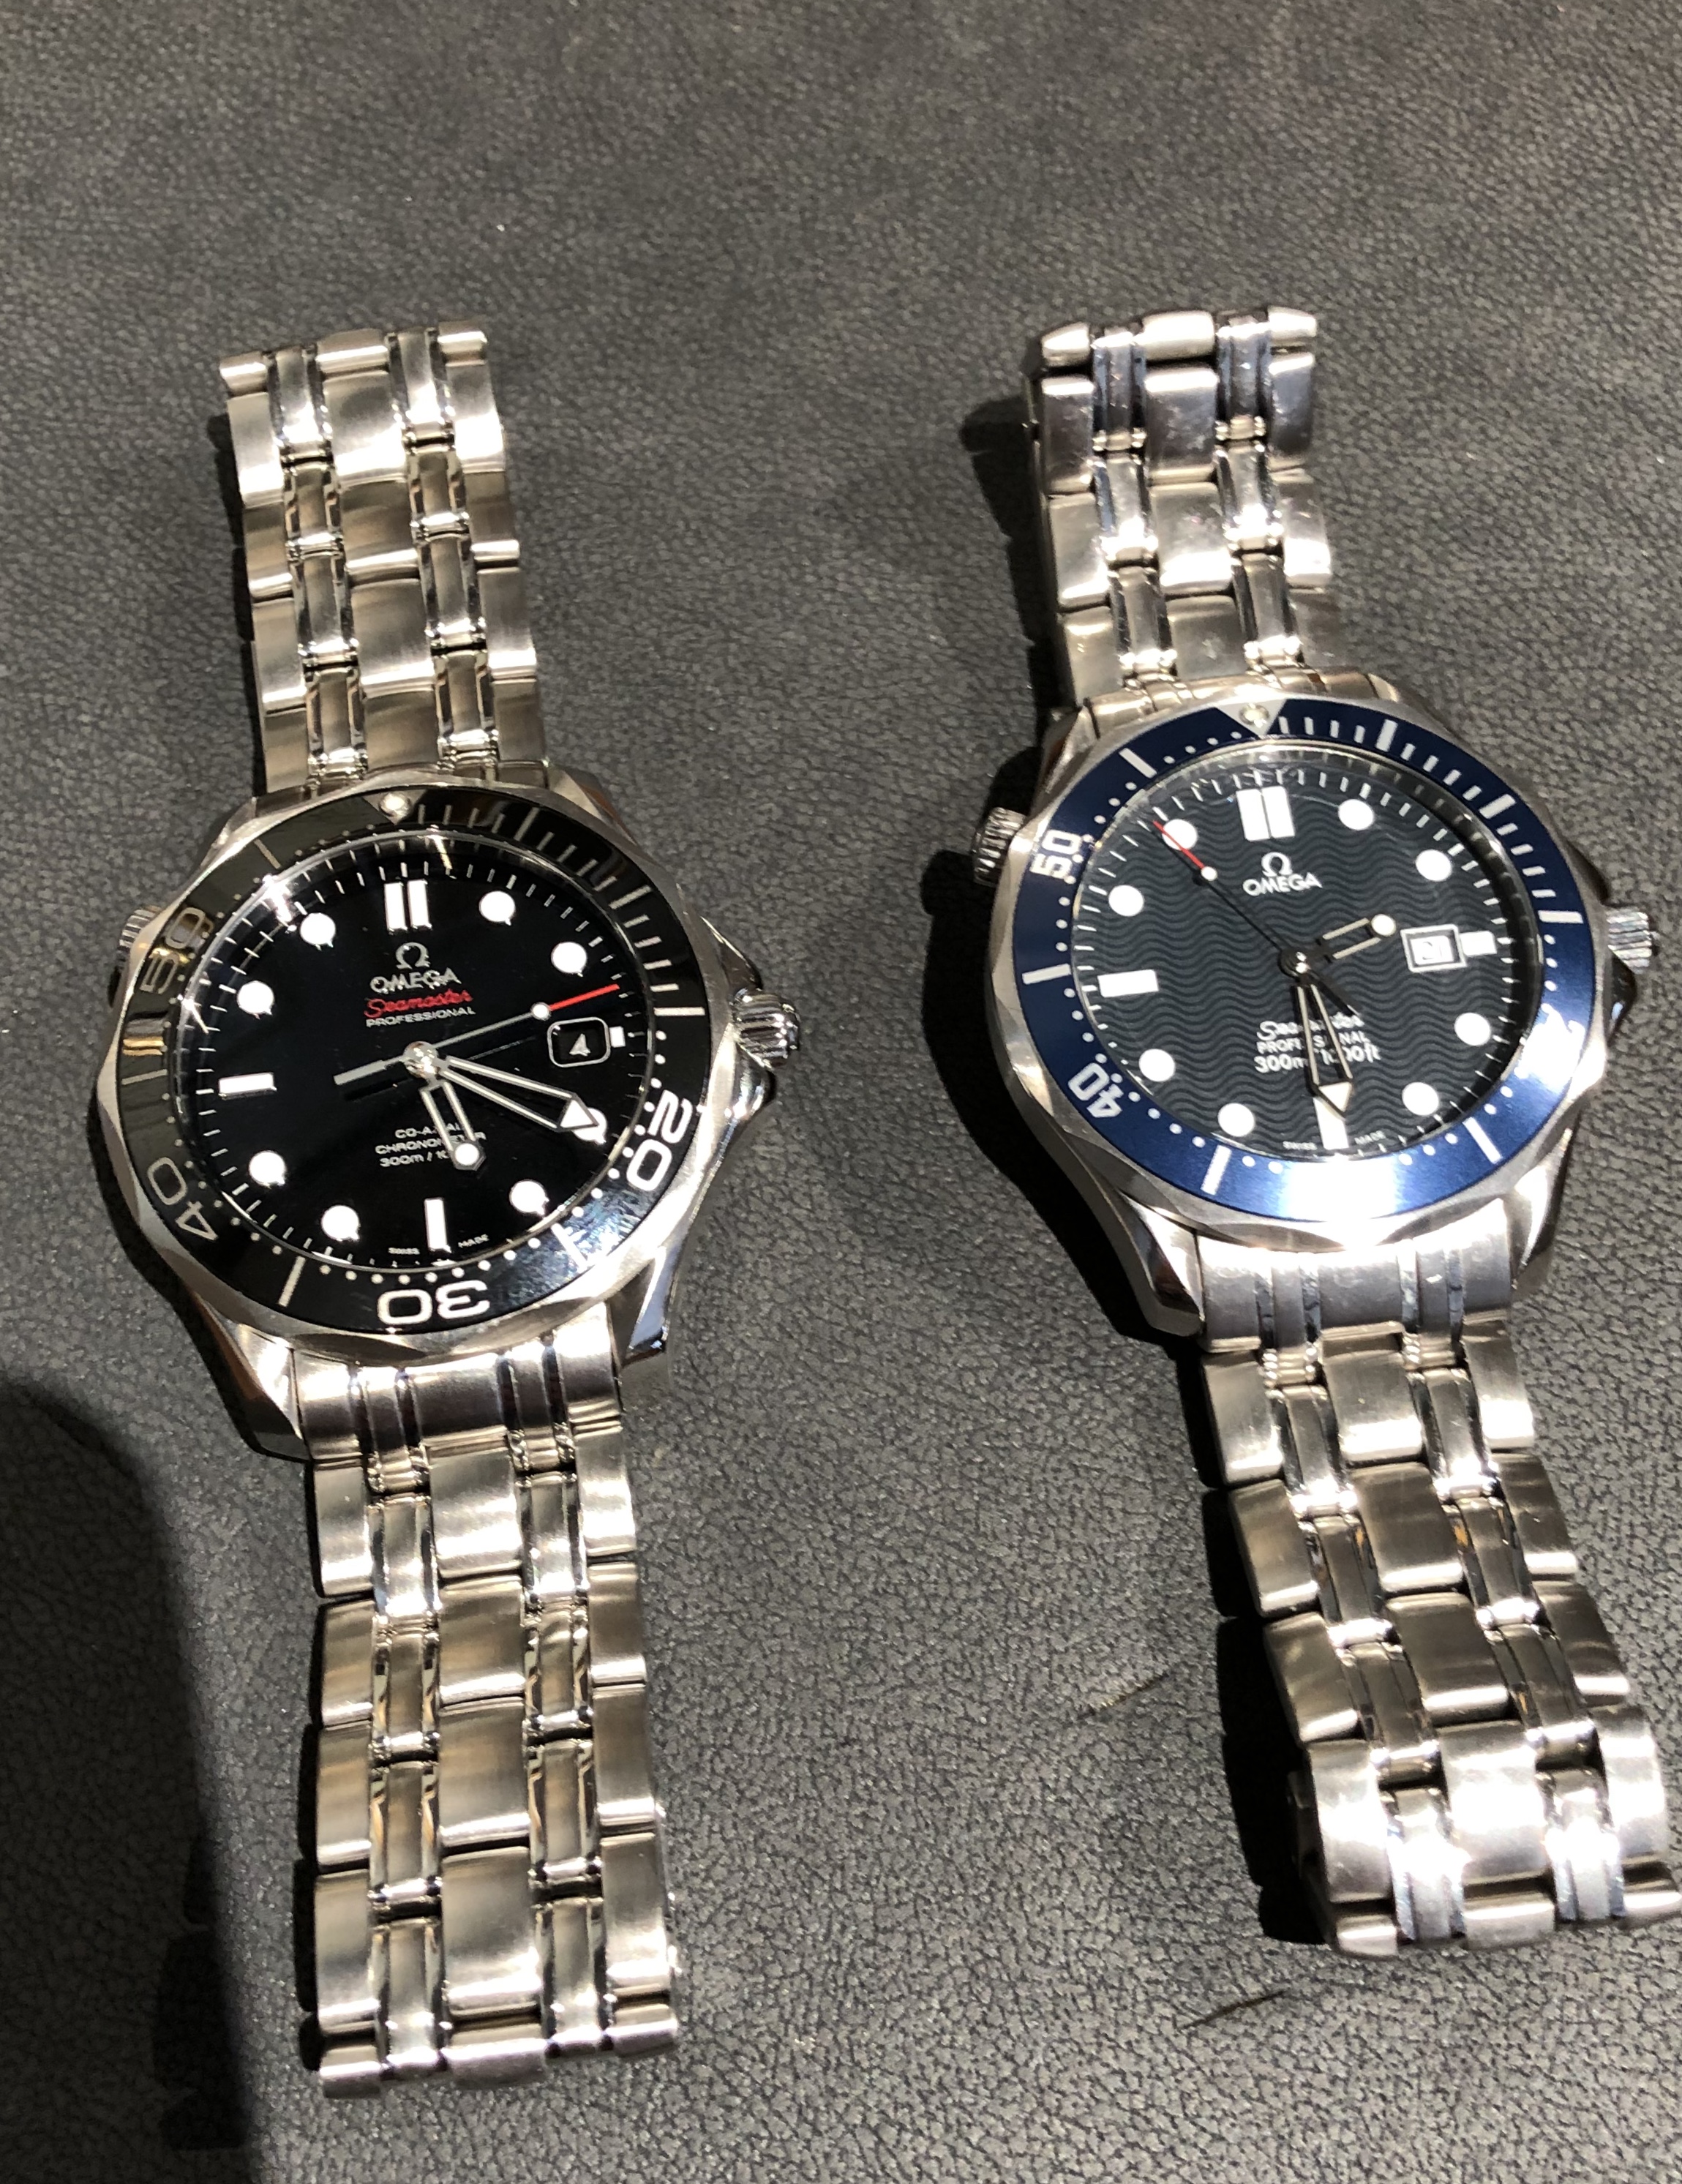 Seamaster 300m Old for Newer? | Omega 